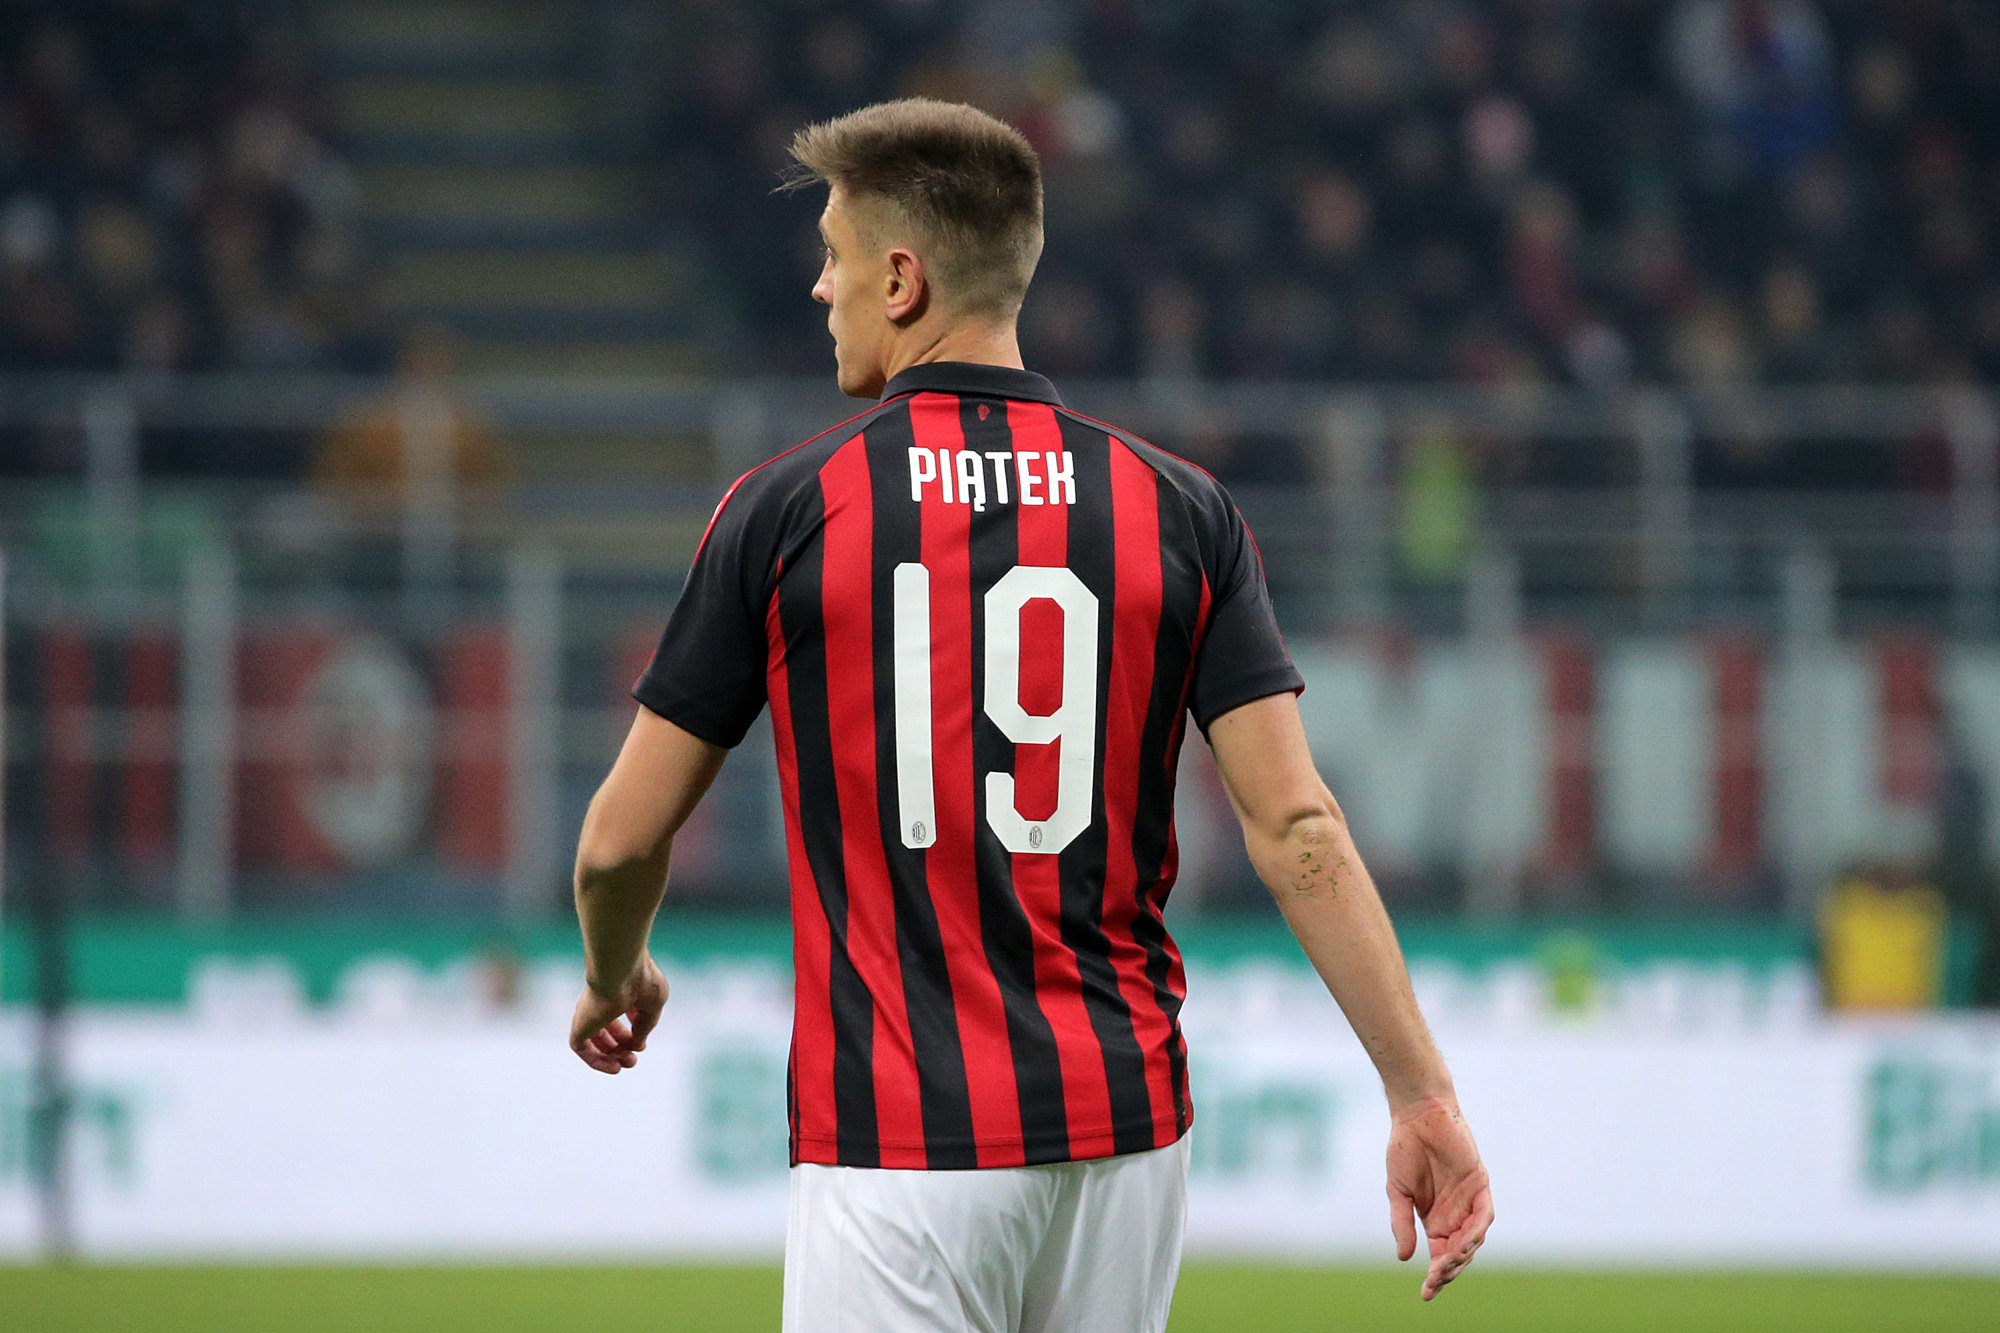 krzysztof-piatek-proves-why-chelsea-should-have-bought-him-over-gonzalo